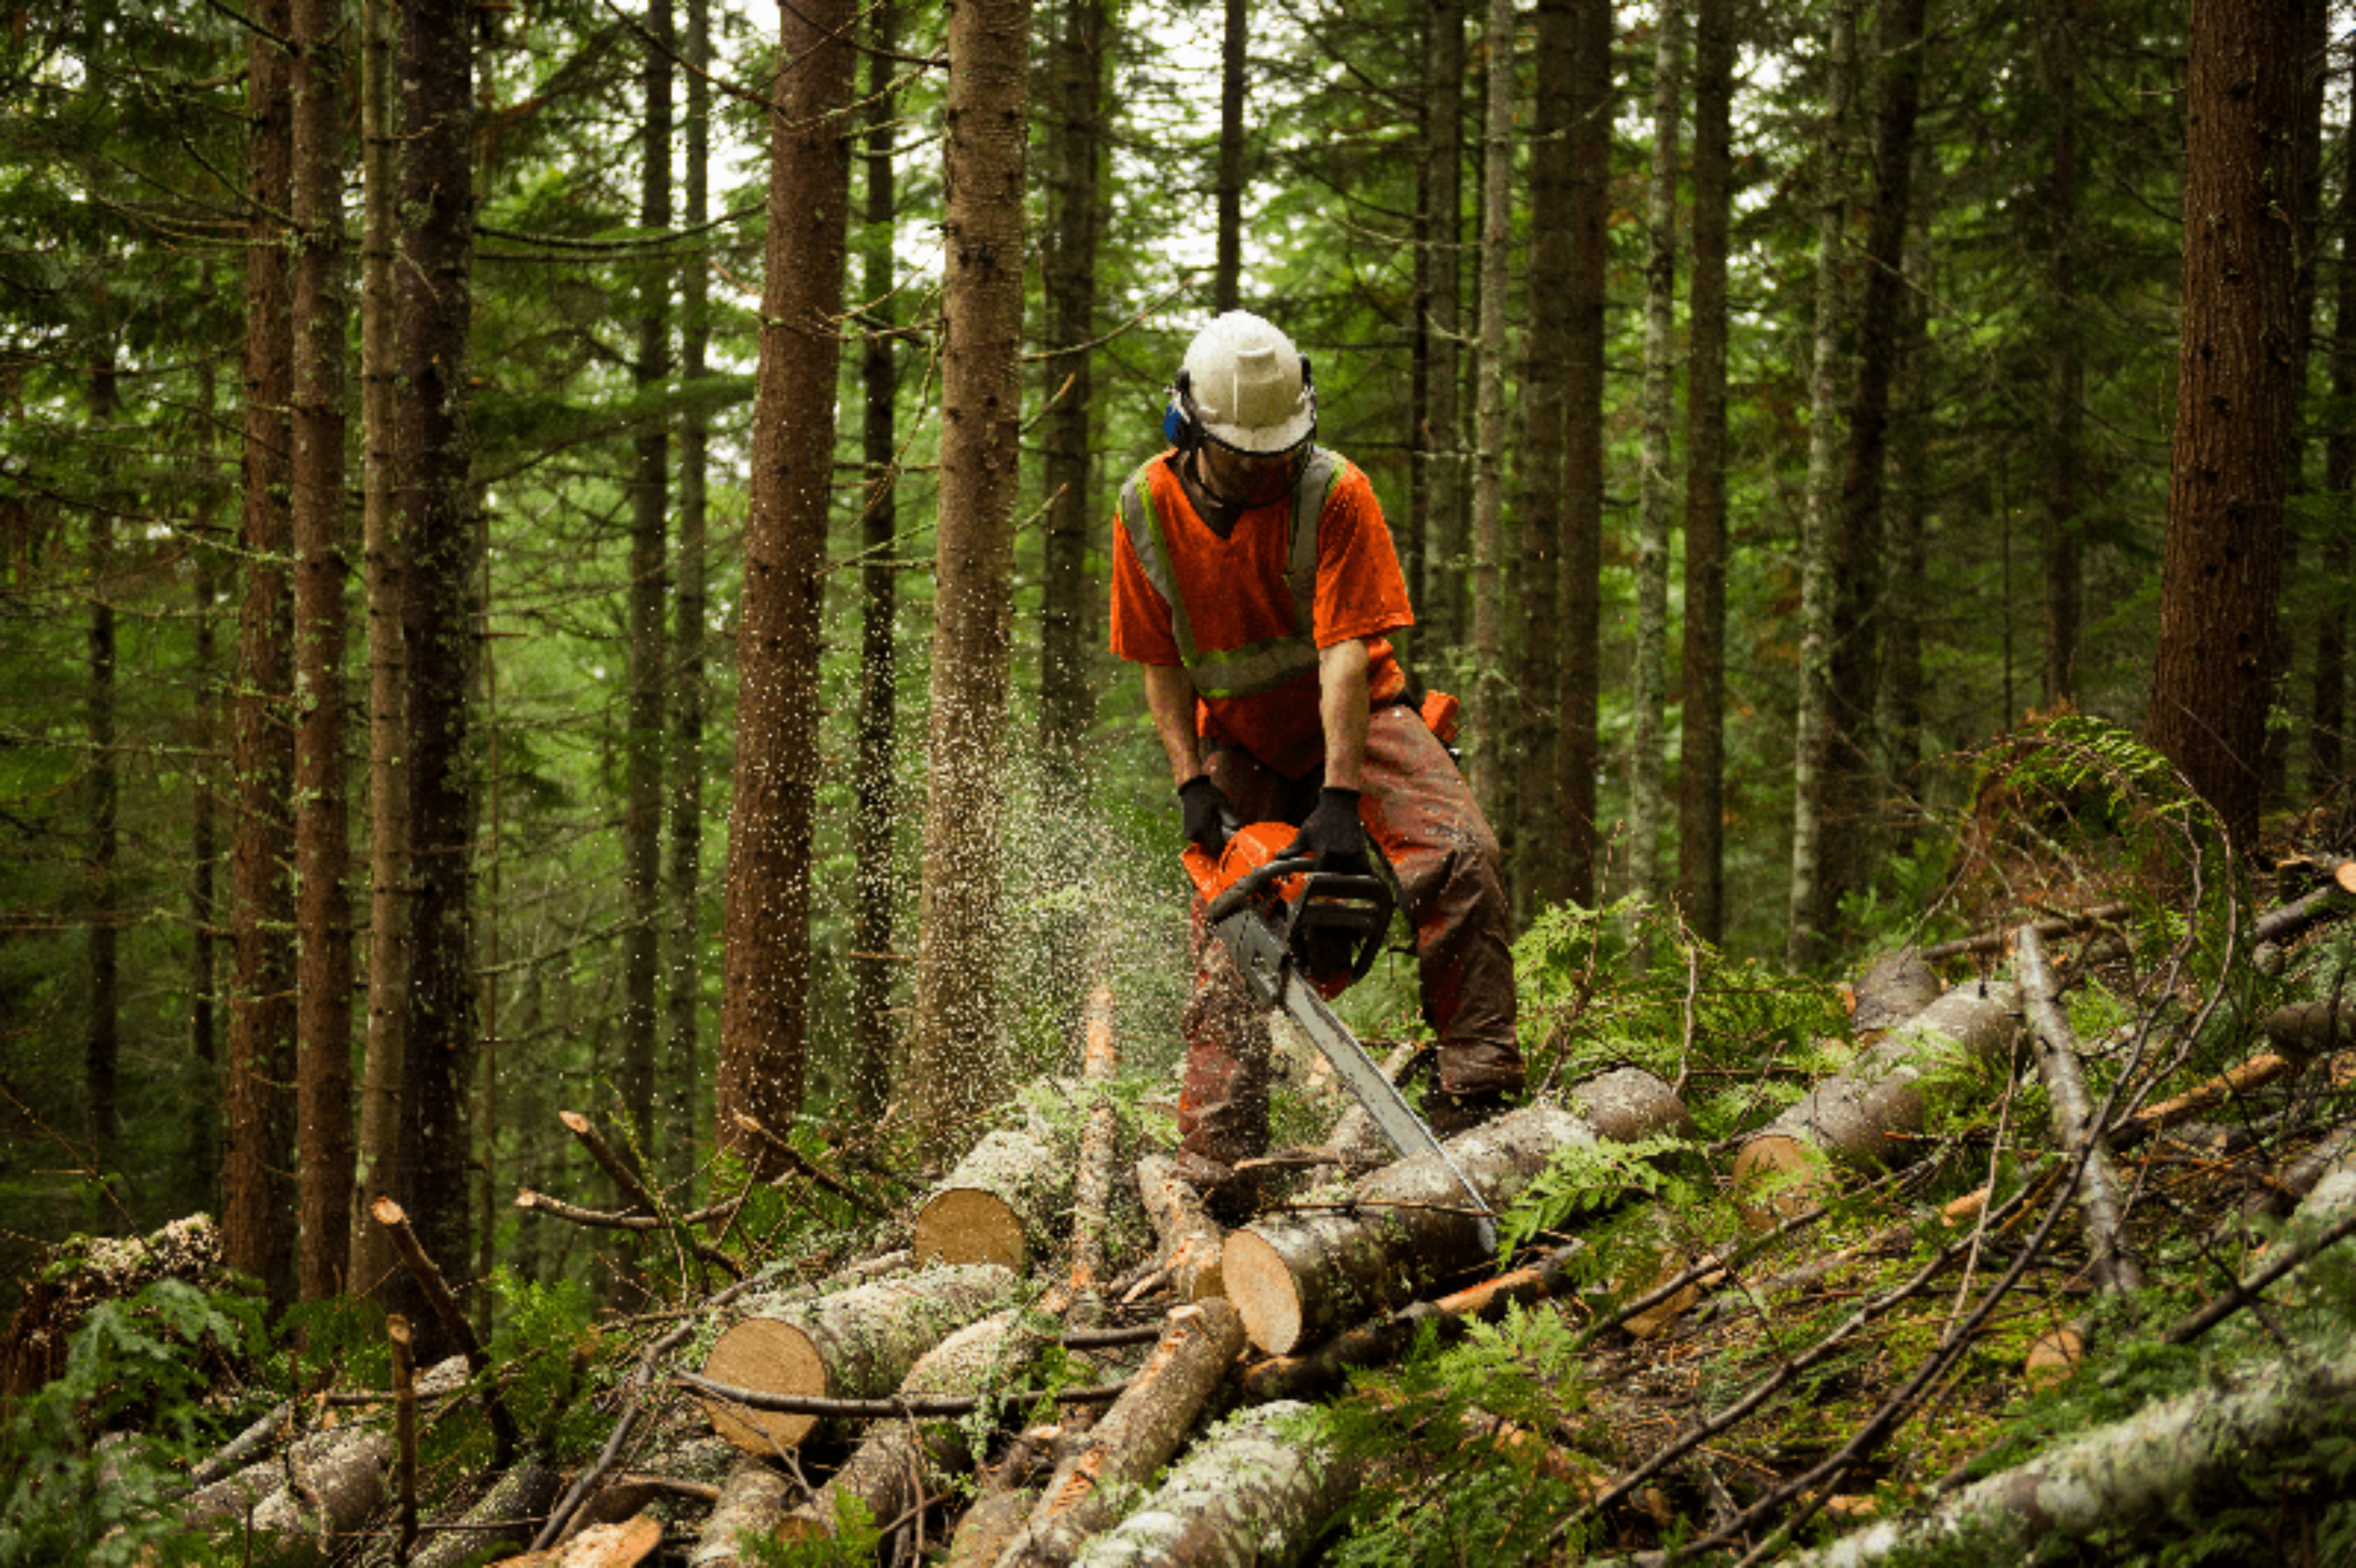 Forester using a chainsaw, Forester standing in woodland using a chainsaw to cut logs.